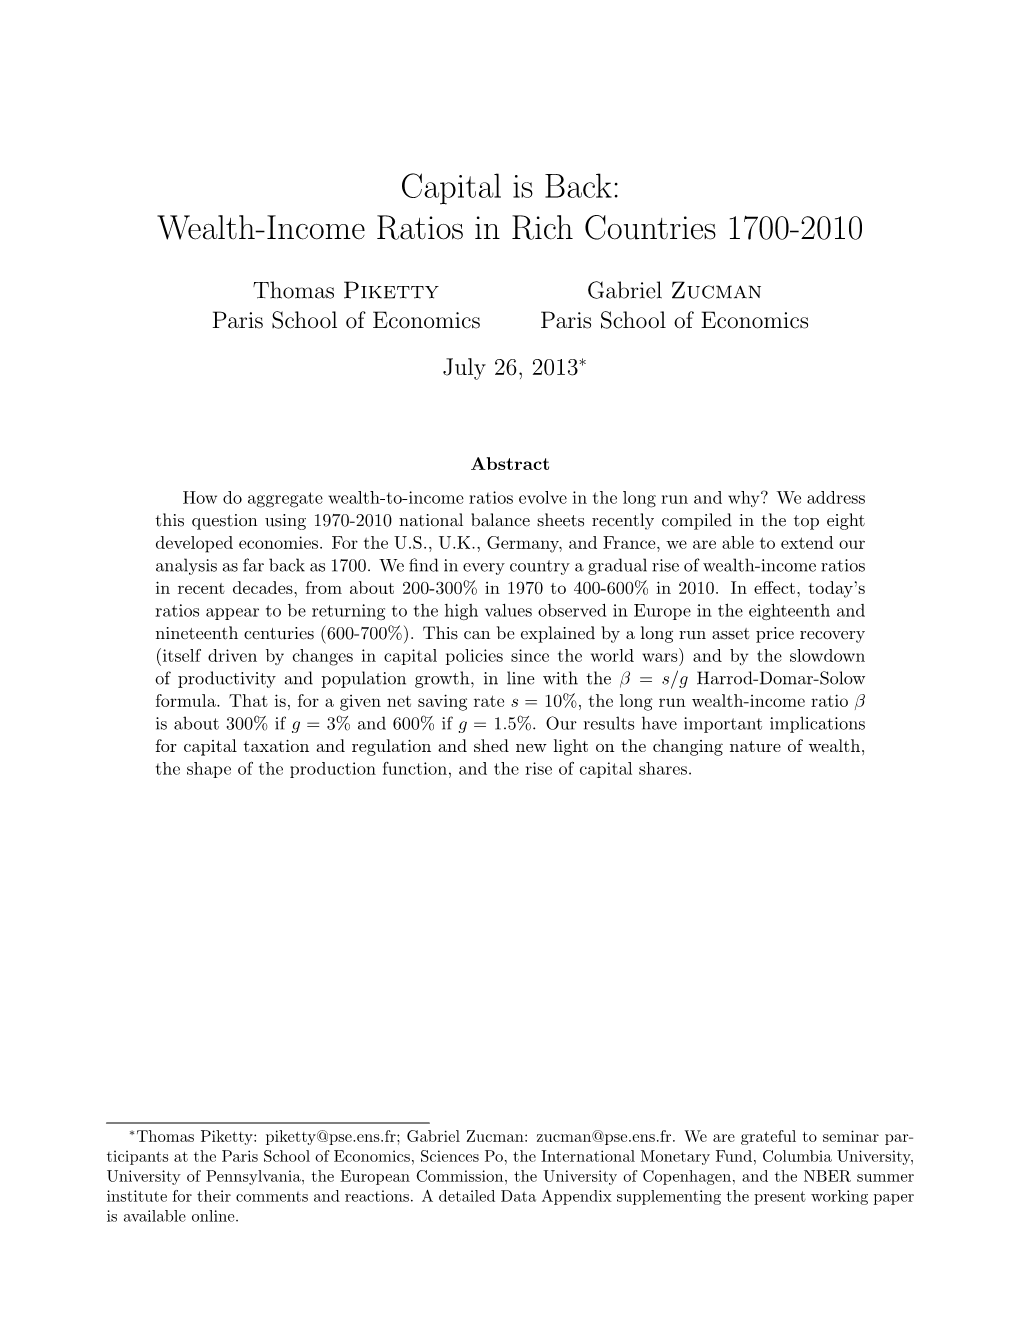 Capital Is Back: Wealth-Income Ratios in Rich Countries 1700-2010